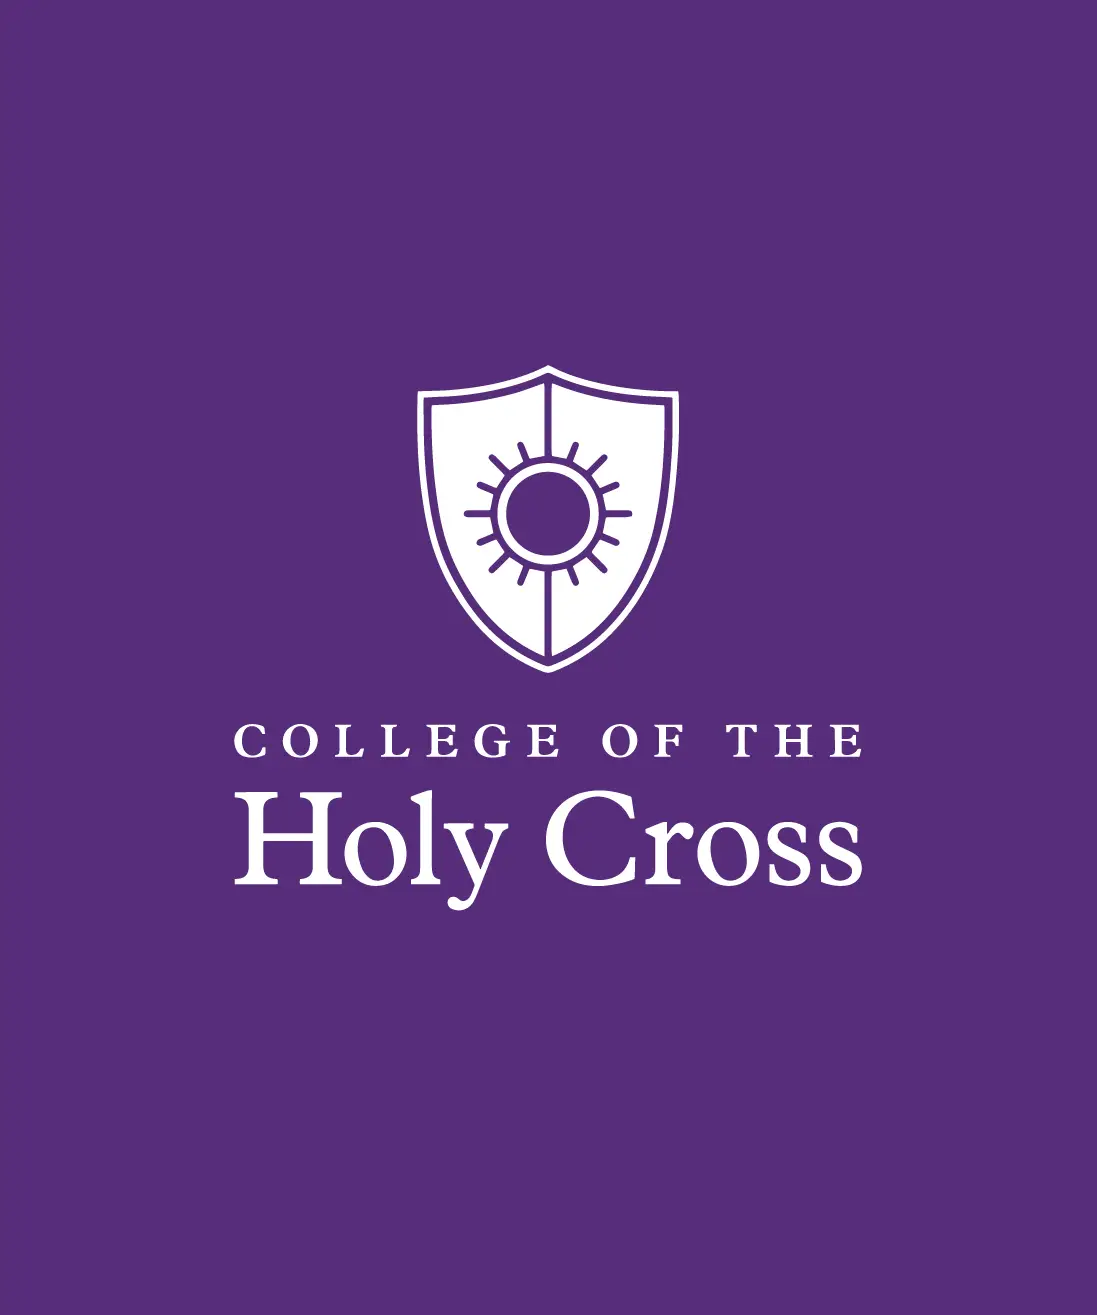 Embracing UDL with Glean at College of the Holy Cross